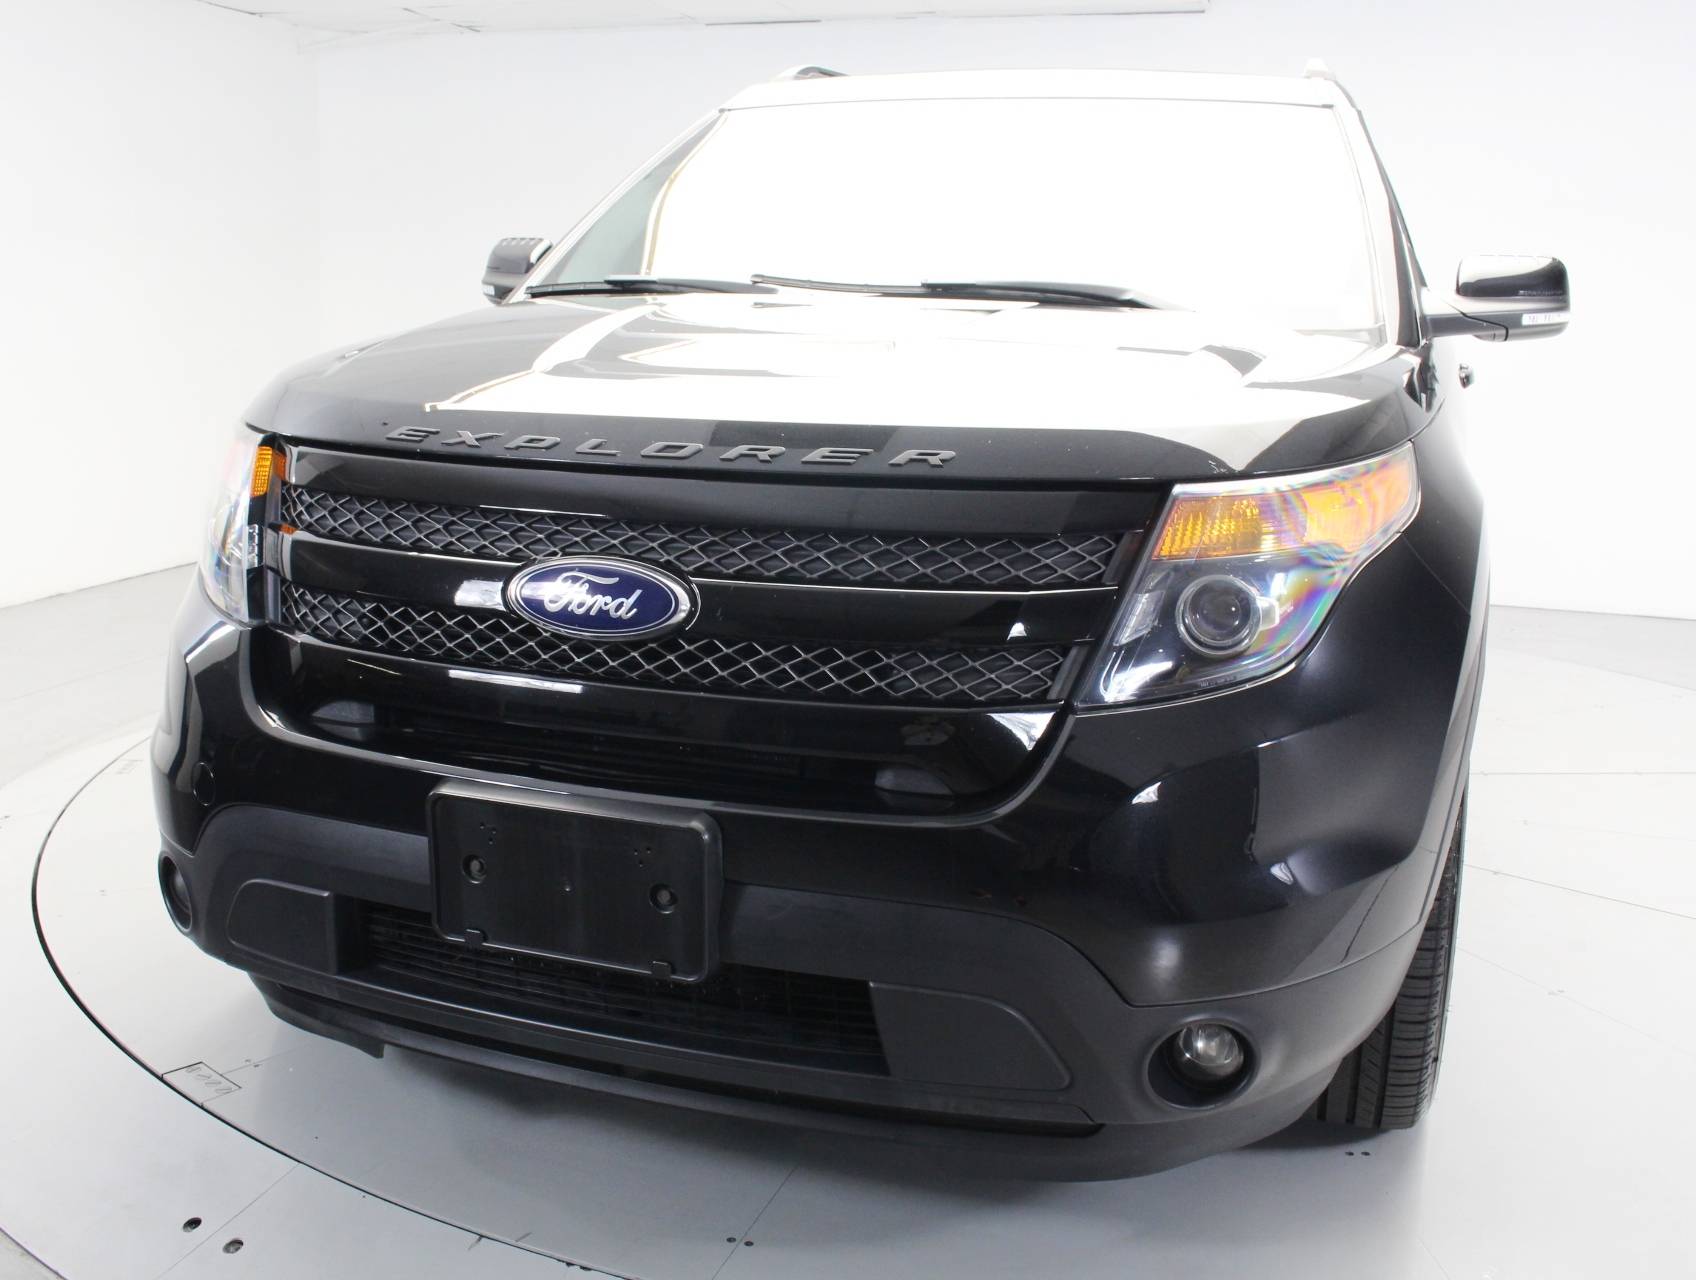 Florida Fine Cars - Used FORD EXPLORER 2015 WEST PALM SPORT